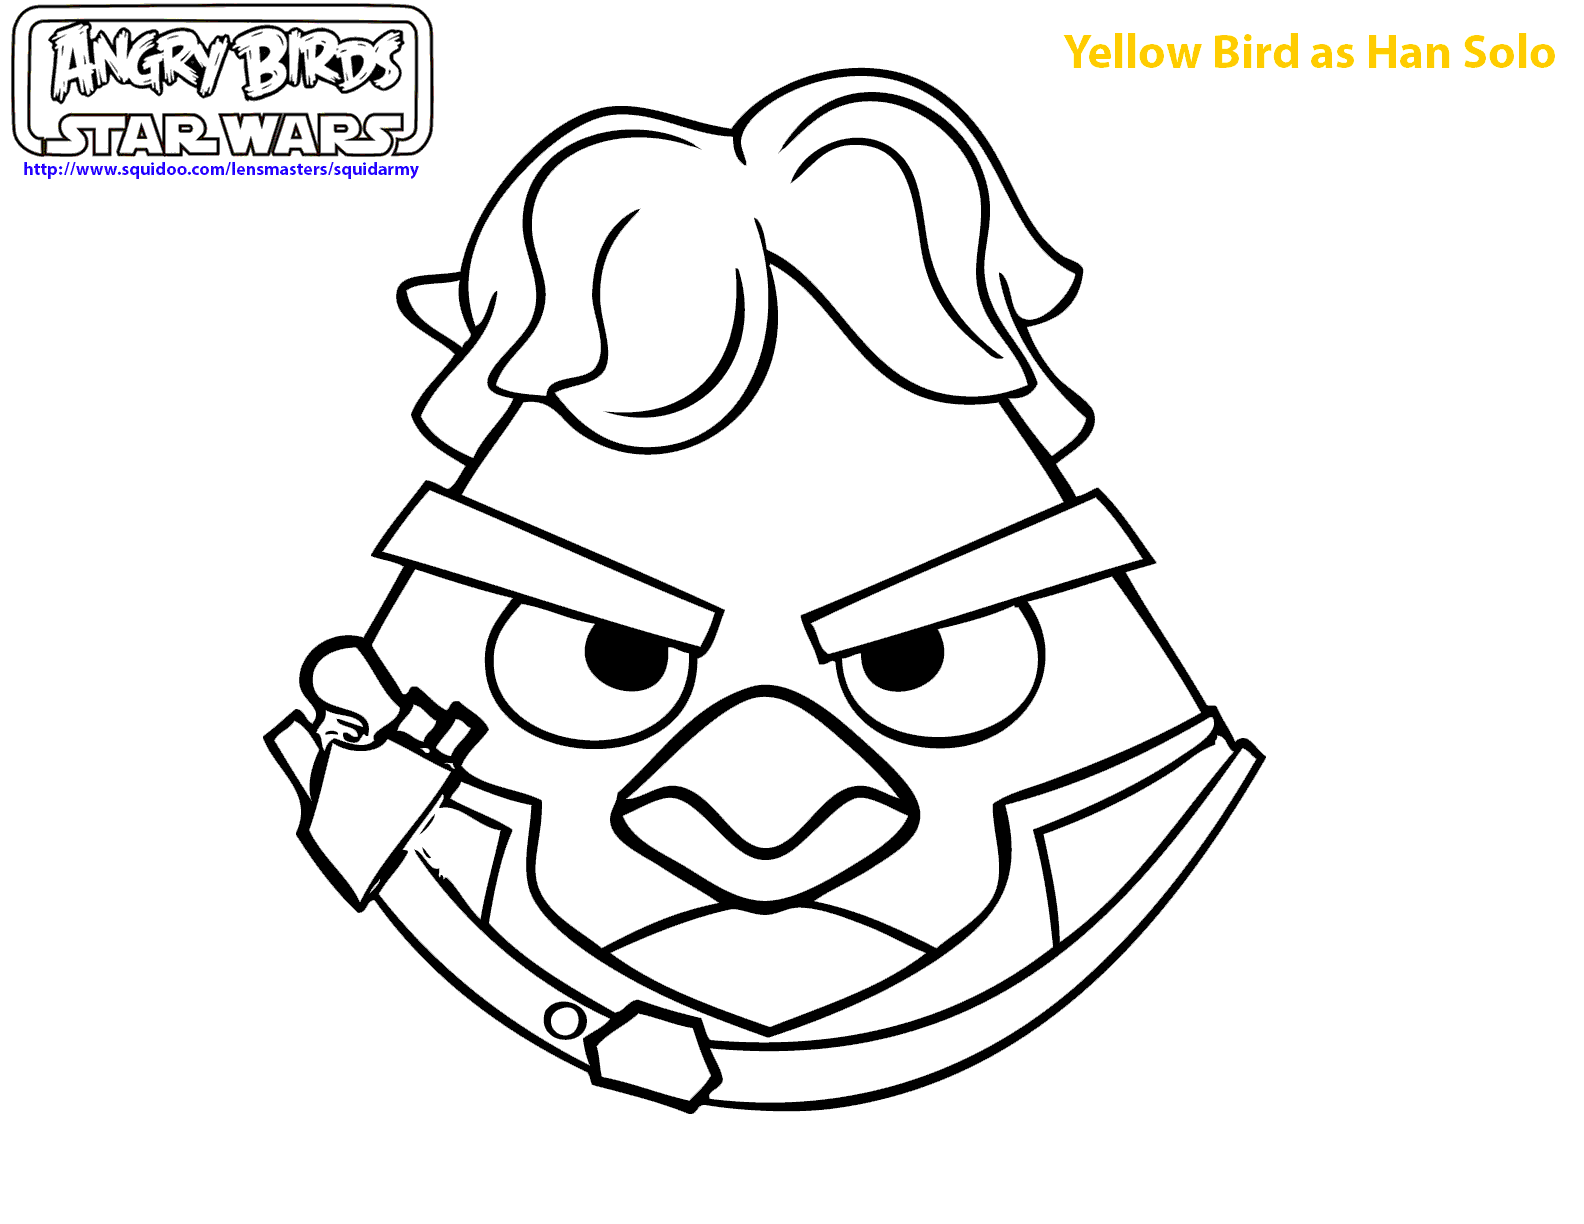 star wars angry birds coloring pages angry birds star wars 03 coloring page coloring page central birds pages angry wars coloring star 